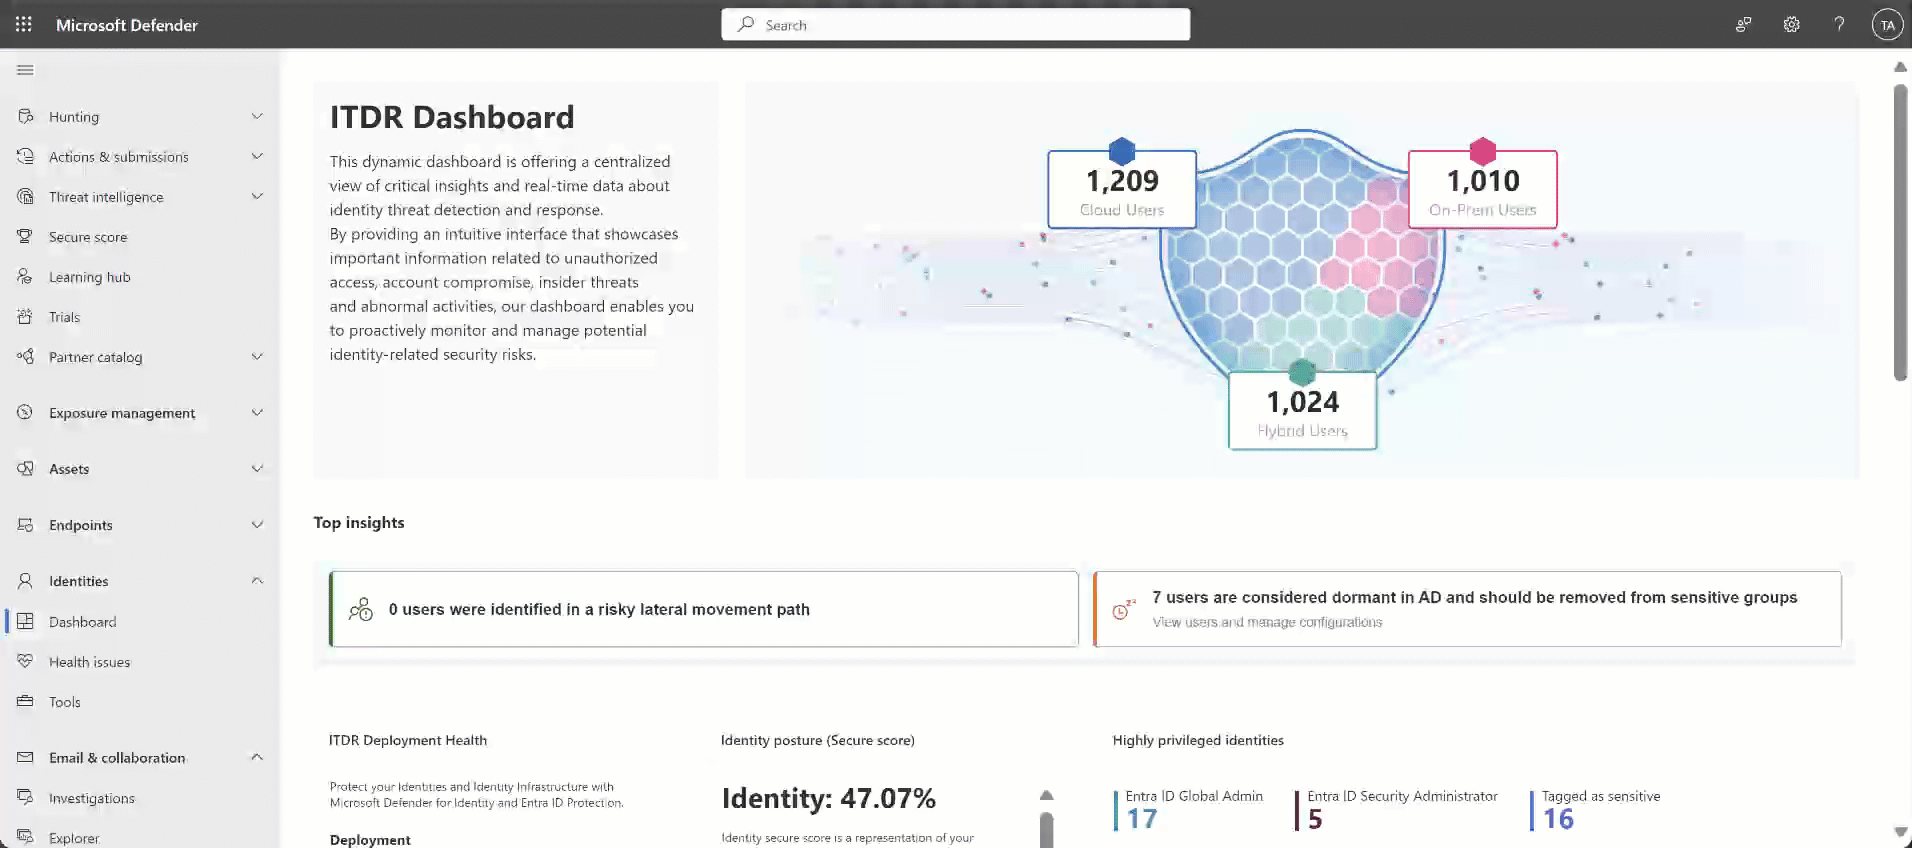 An animated GIF showing a sample ITDR Dashboard page.